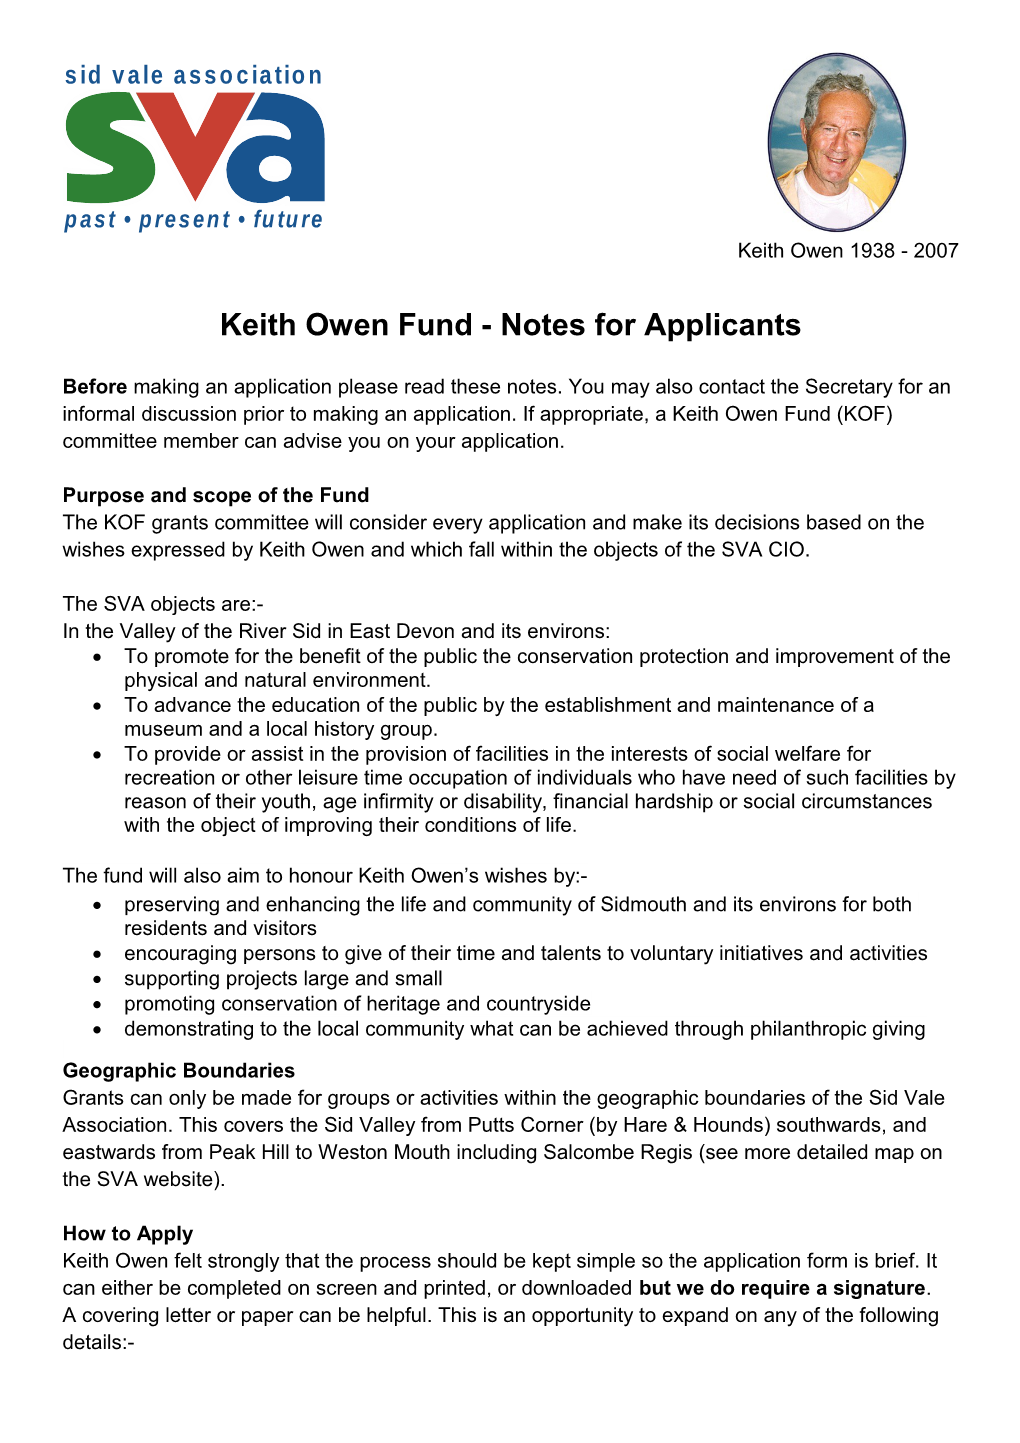 Keith Owen Fund - Notes for Applicants